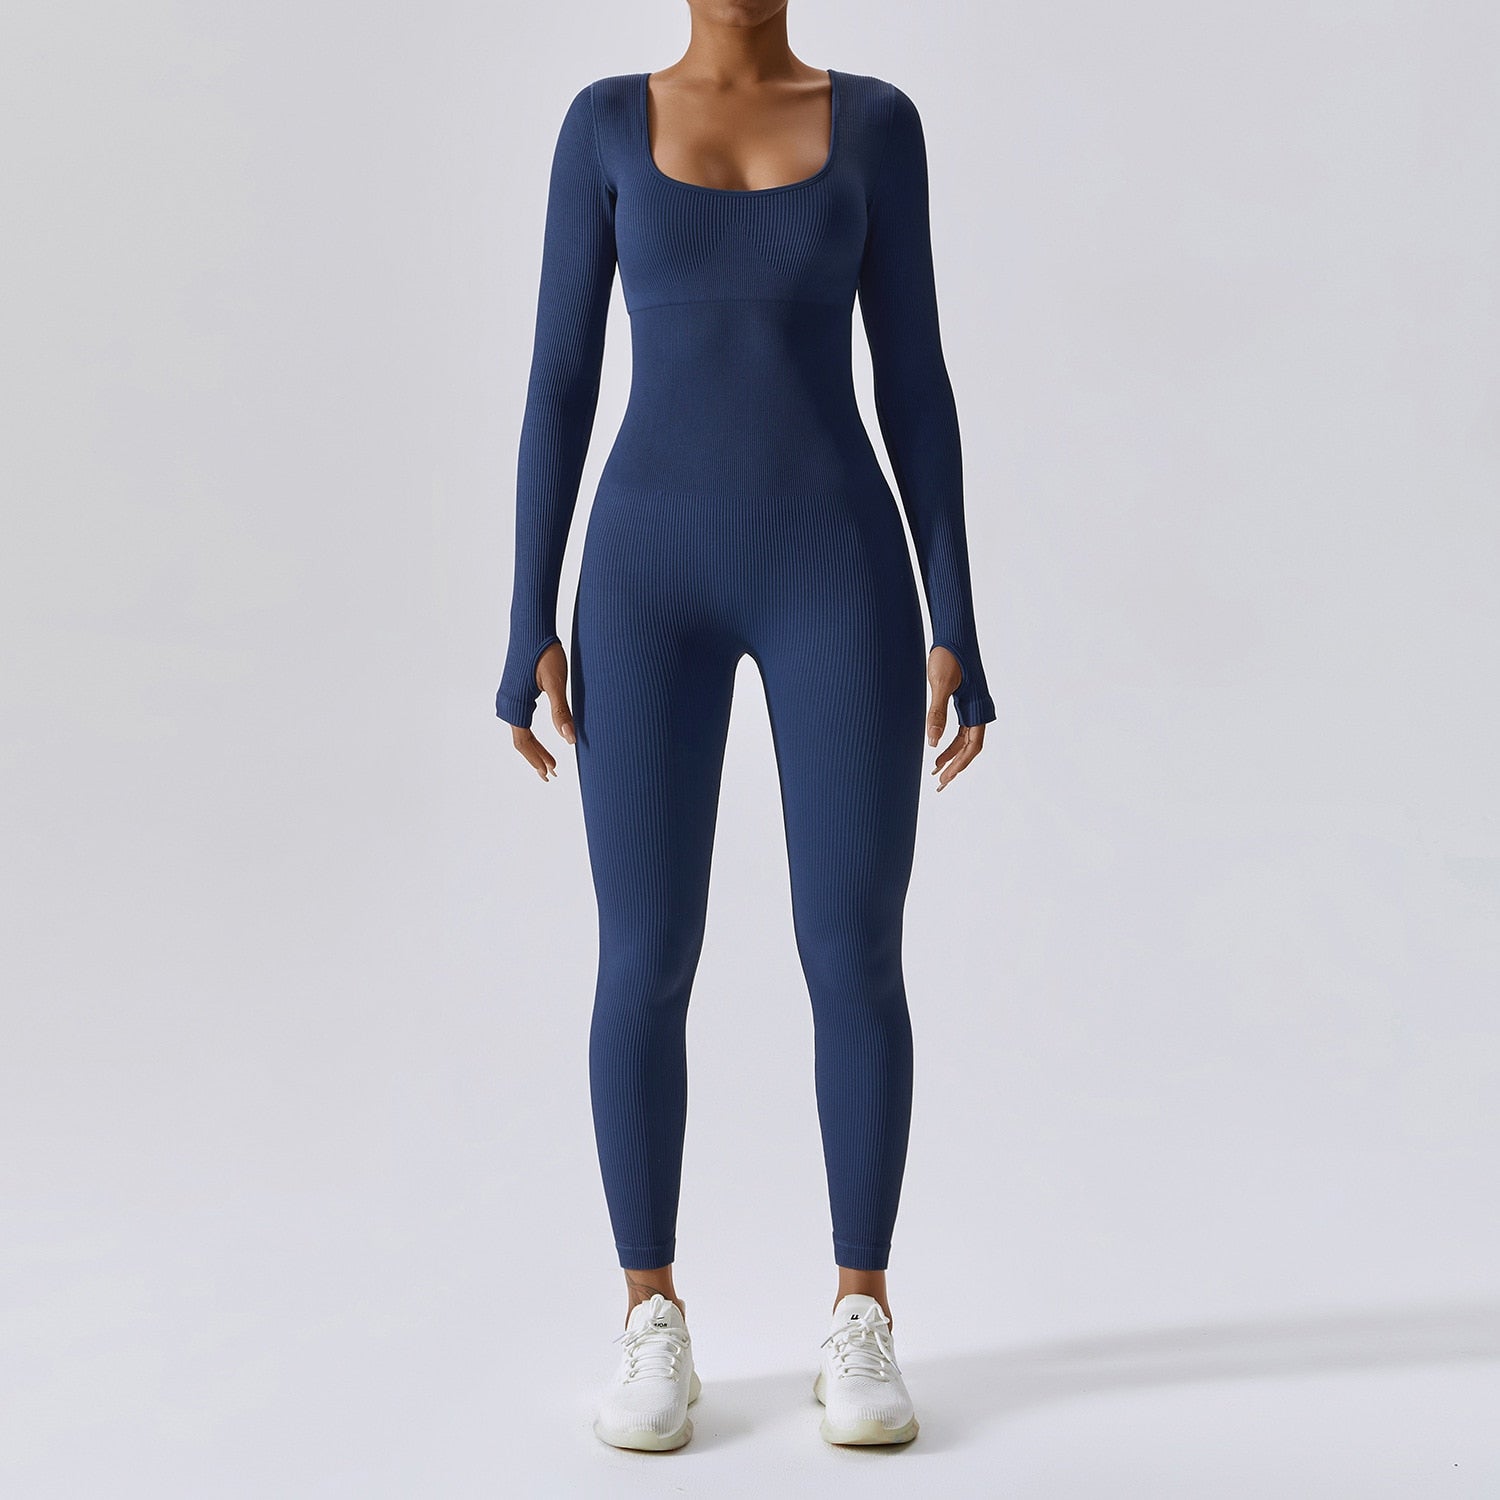 Experience Unmatched Freedom and Style with our Seamless Yoga Suit – Linions